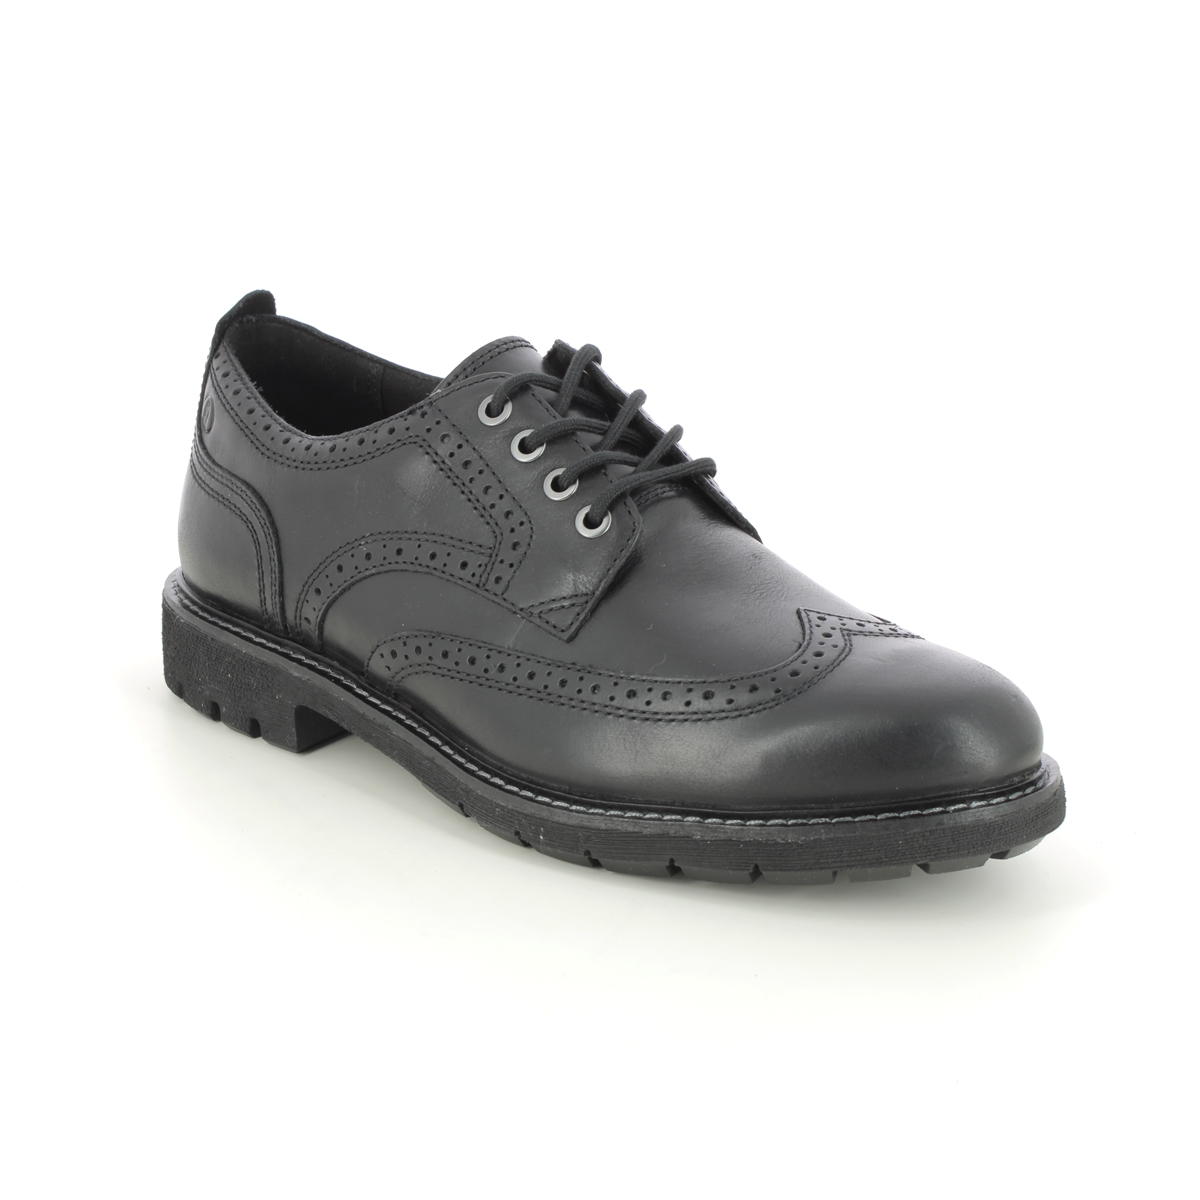 Clarks Batcombe Far Wing Black leather Mens Brogues 7343-87G in a Plain Leather in Size 11